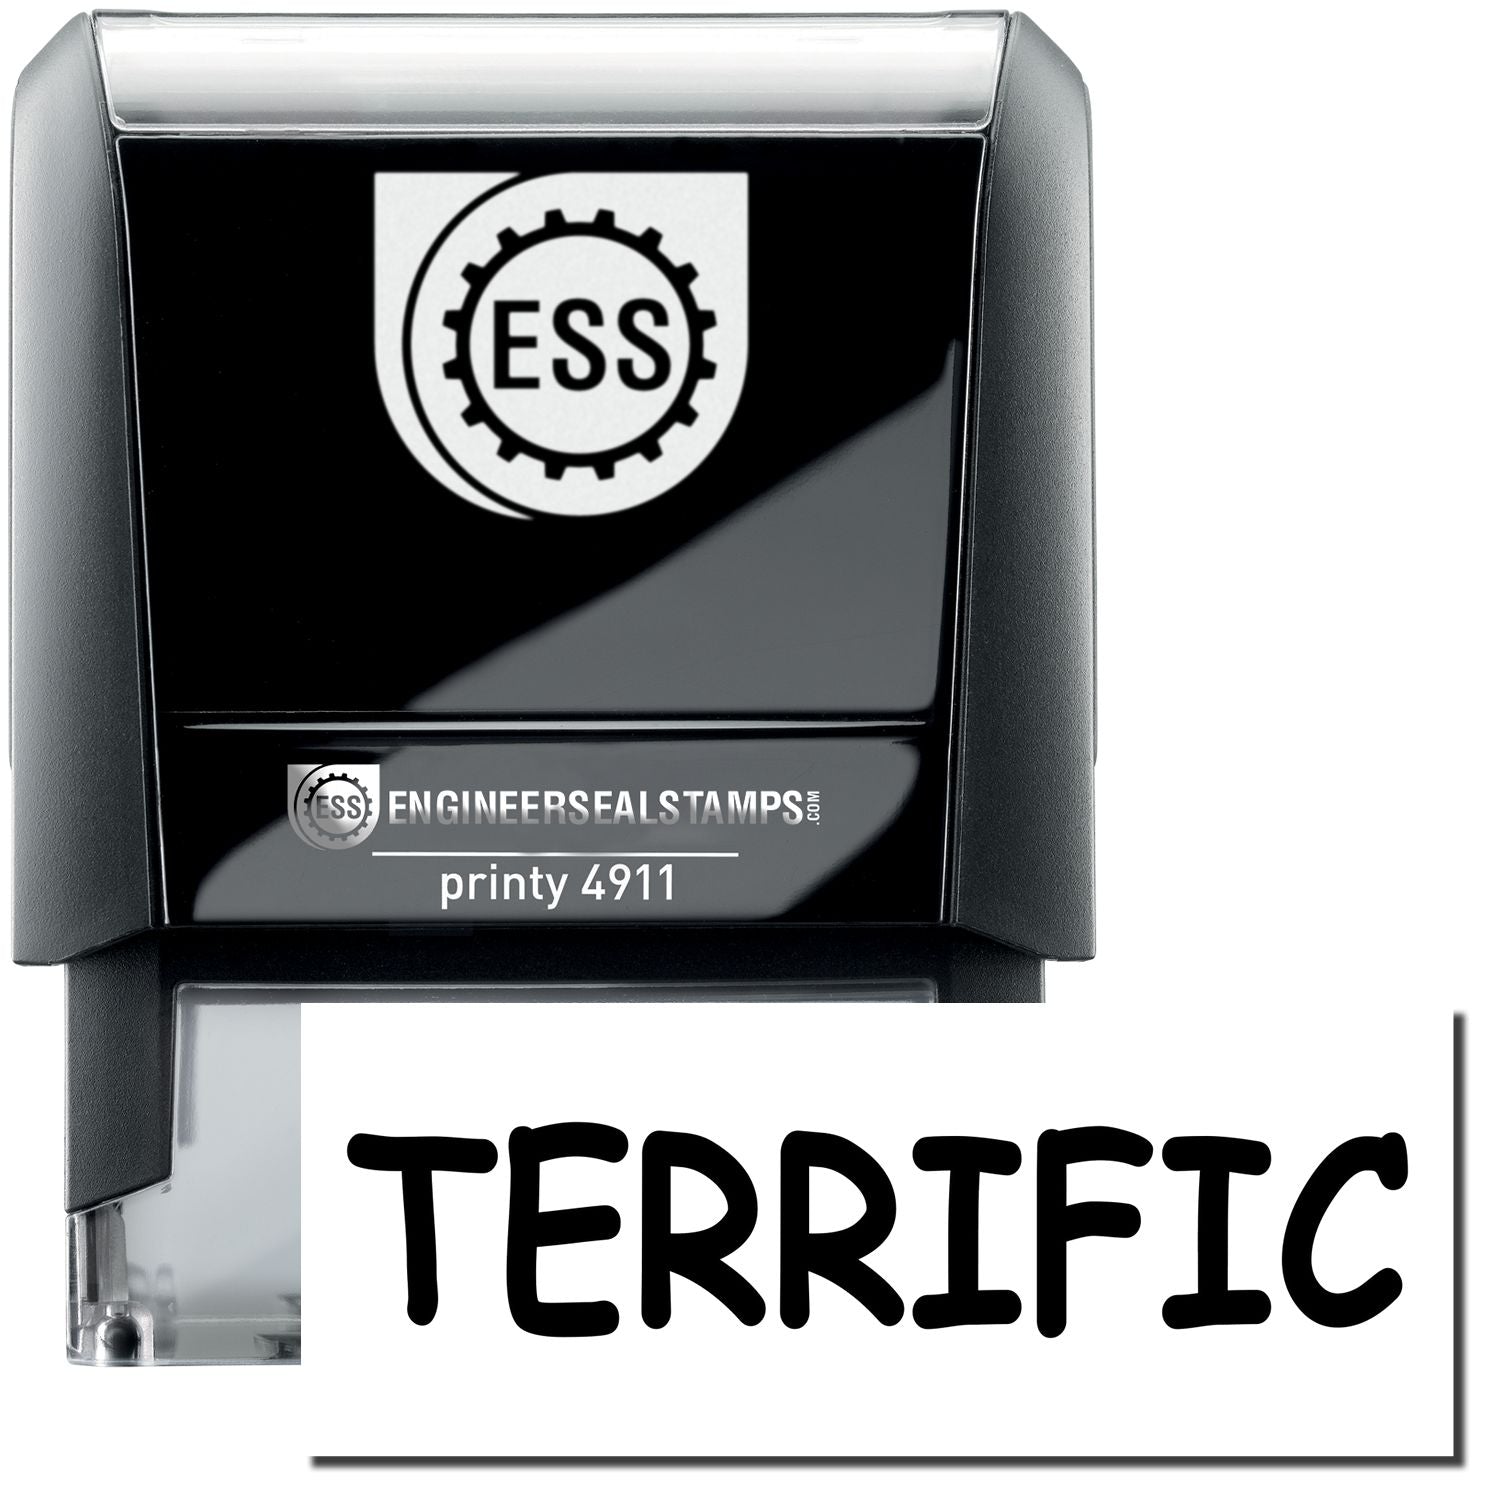 A self-inking stamp with a stamped image showing how the text "TERRIFIC" is displayed after stamping.